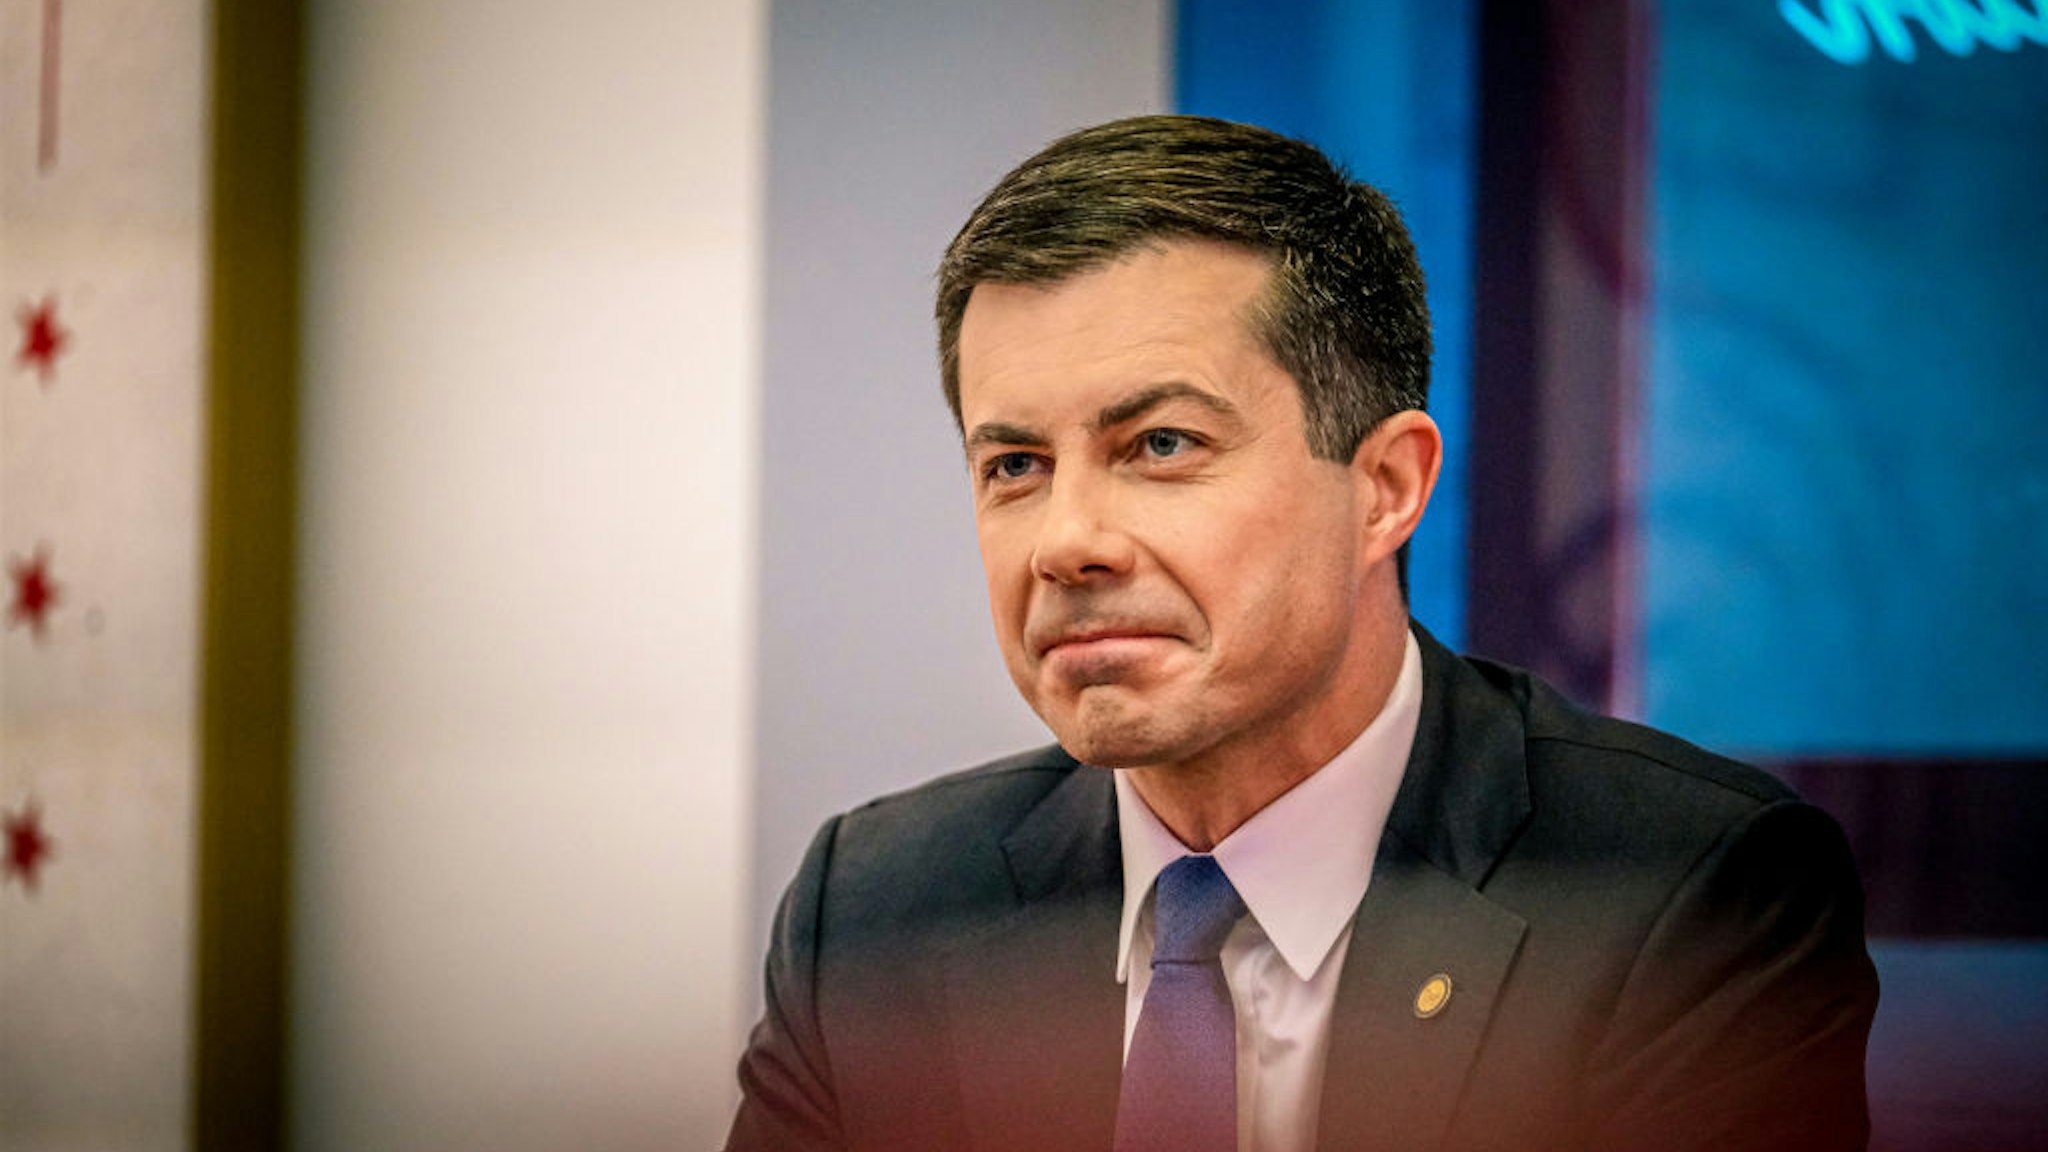 MEET THE PRESS -- Pictured: Pete Buttigieg, Secretary of Transportation, appears on Meet the Press in Washington, D.C. Sunday, Feb. 5, 2023. -- (Photo by: William B. Plowman/NBC via Getty Images)